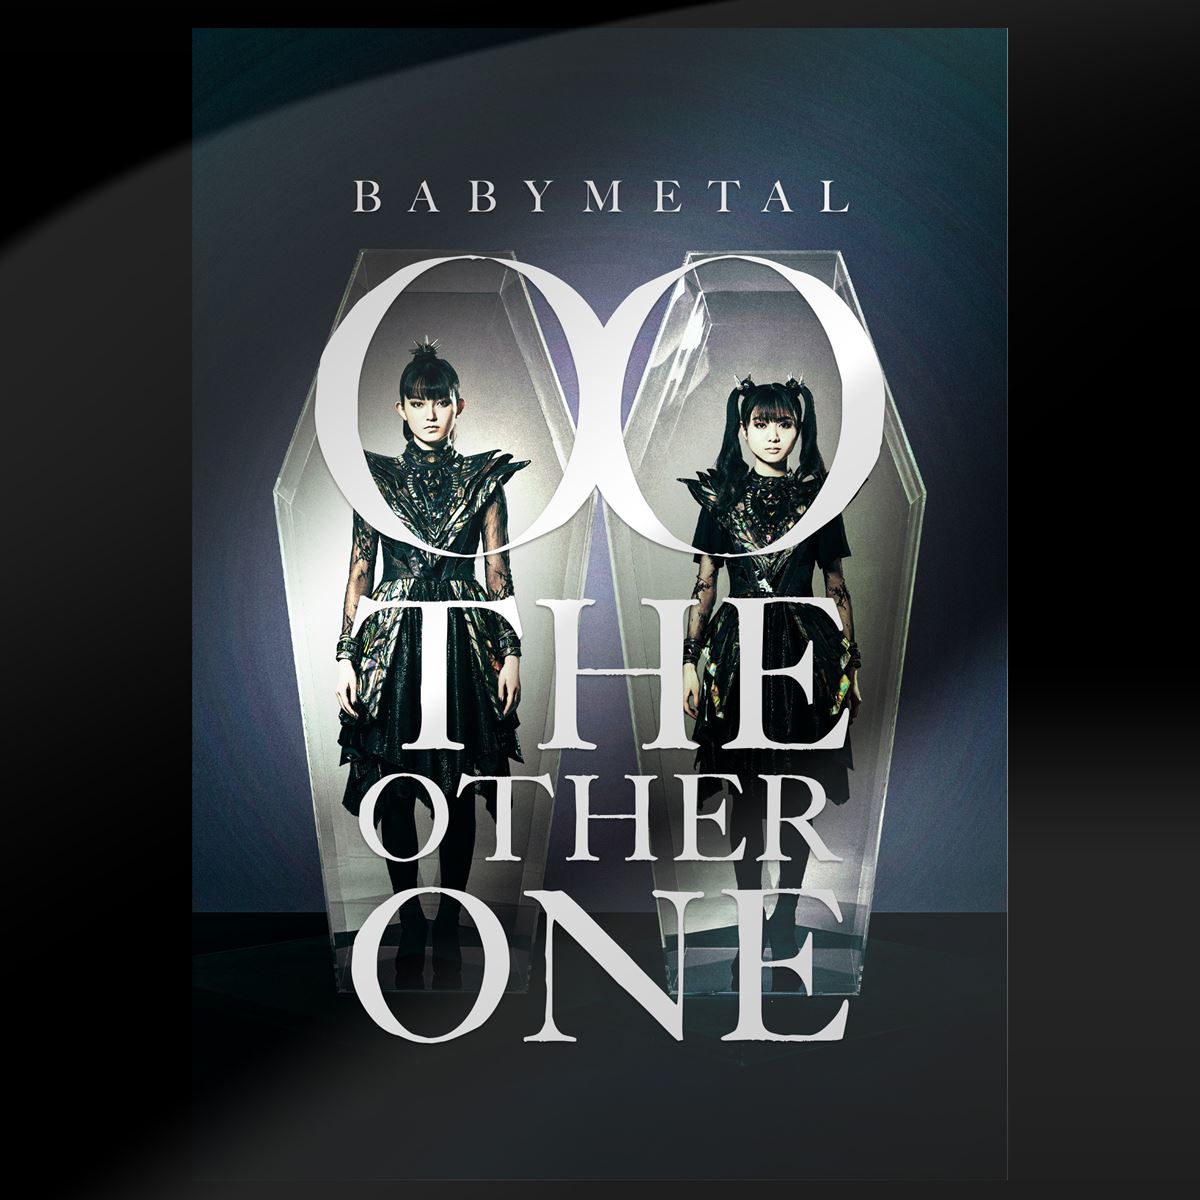 BABYMETAL、初のコンセプトアルバムTHE OTHER ONE収録詳細